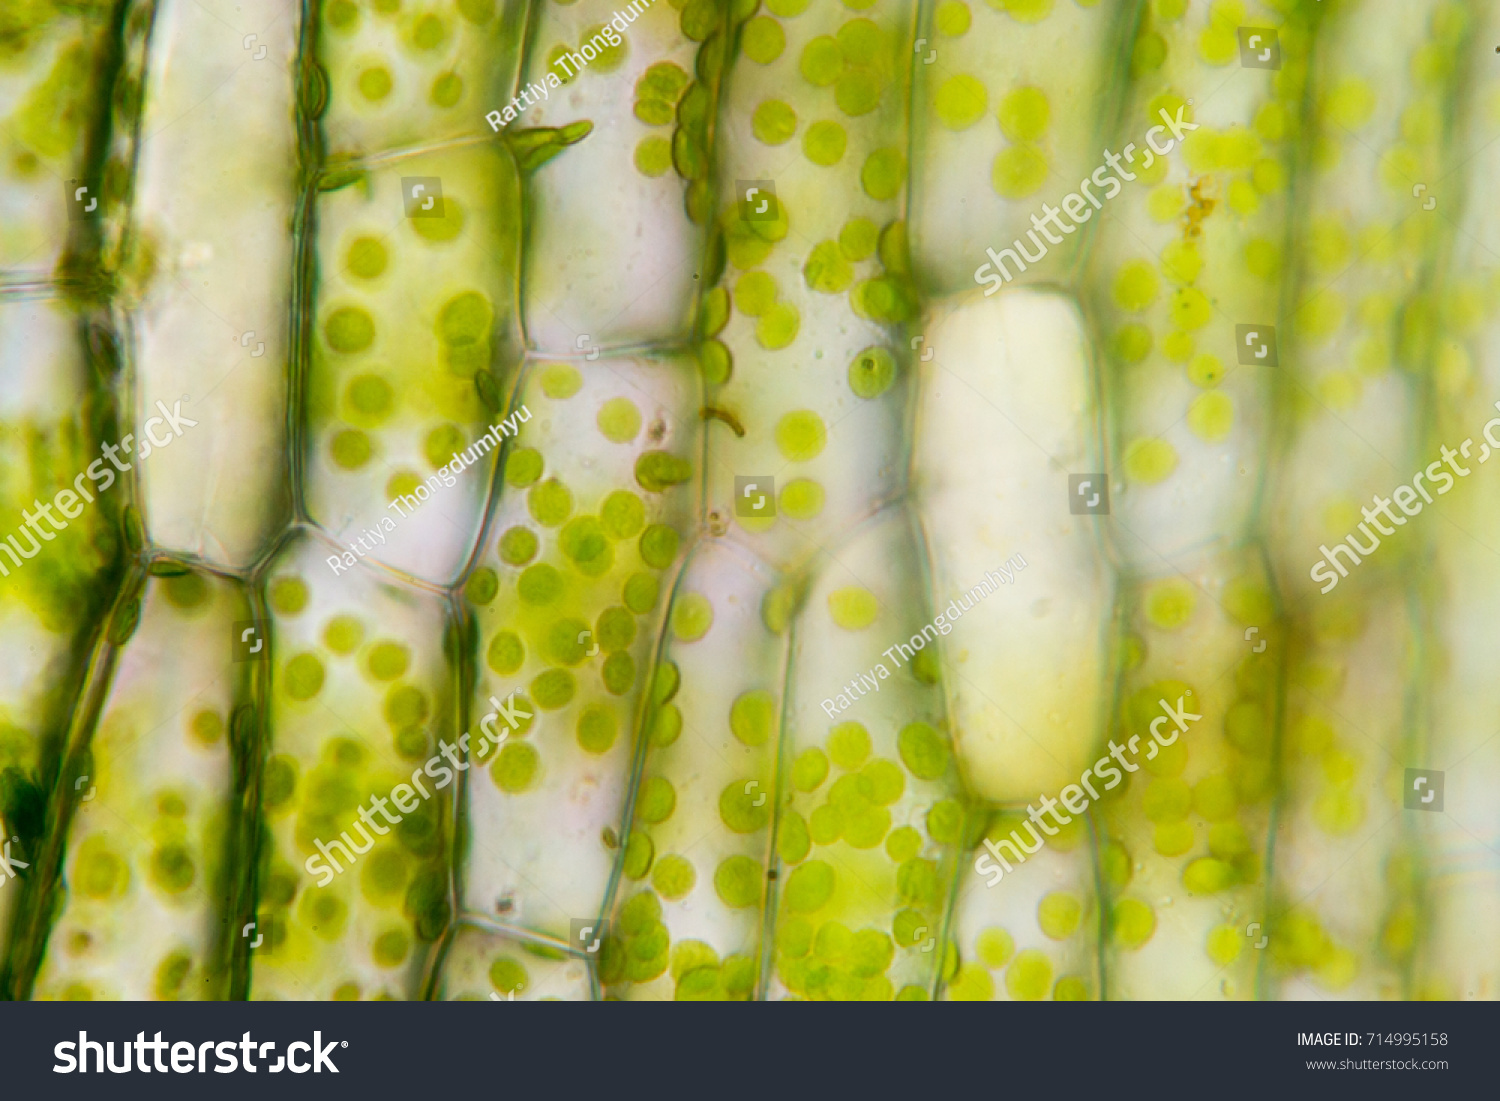 Cell structure Hydrilla, view of the leaf surface showing plant cells under the  microscope for classroom education. #714995158